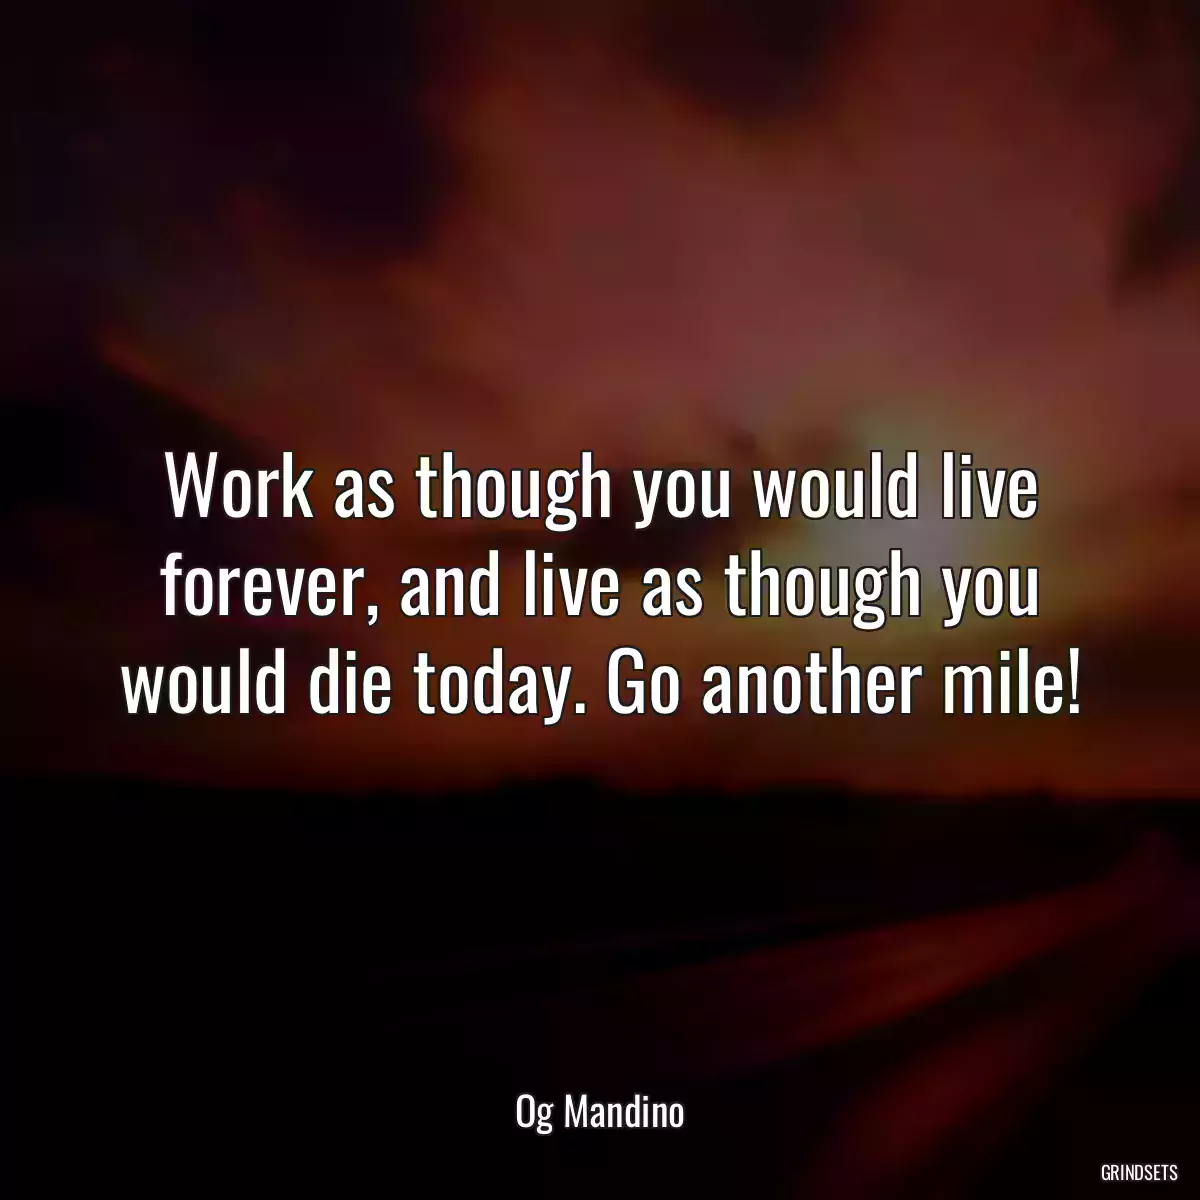 Work as though you would live forever, and live as though you would die today. Go another mile!